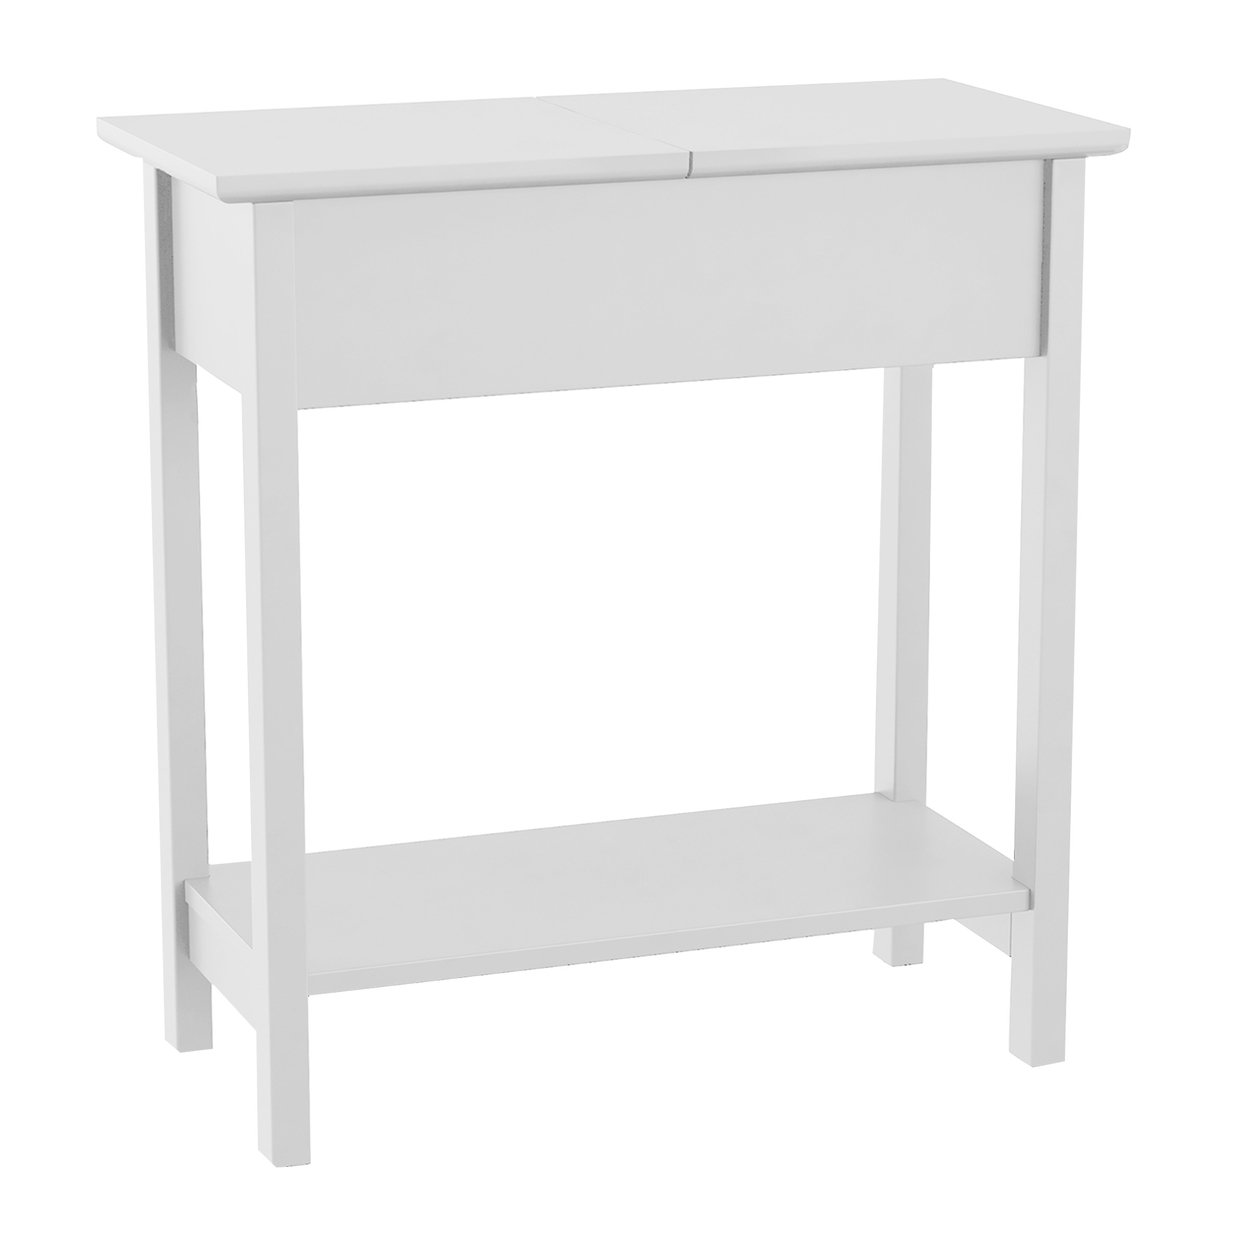 Flip Top White End Table Slim Side Console Hinged Storage Compartment